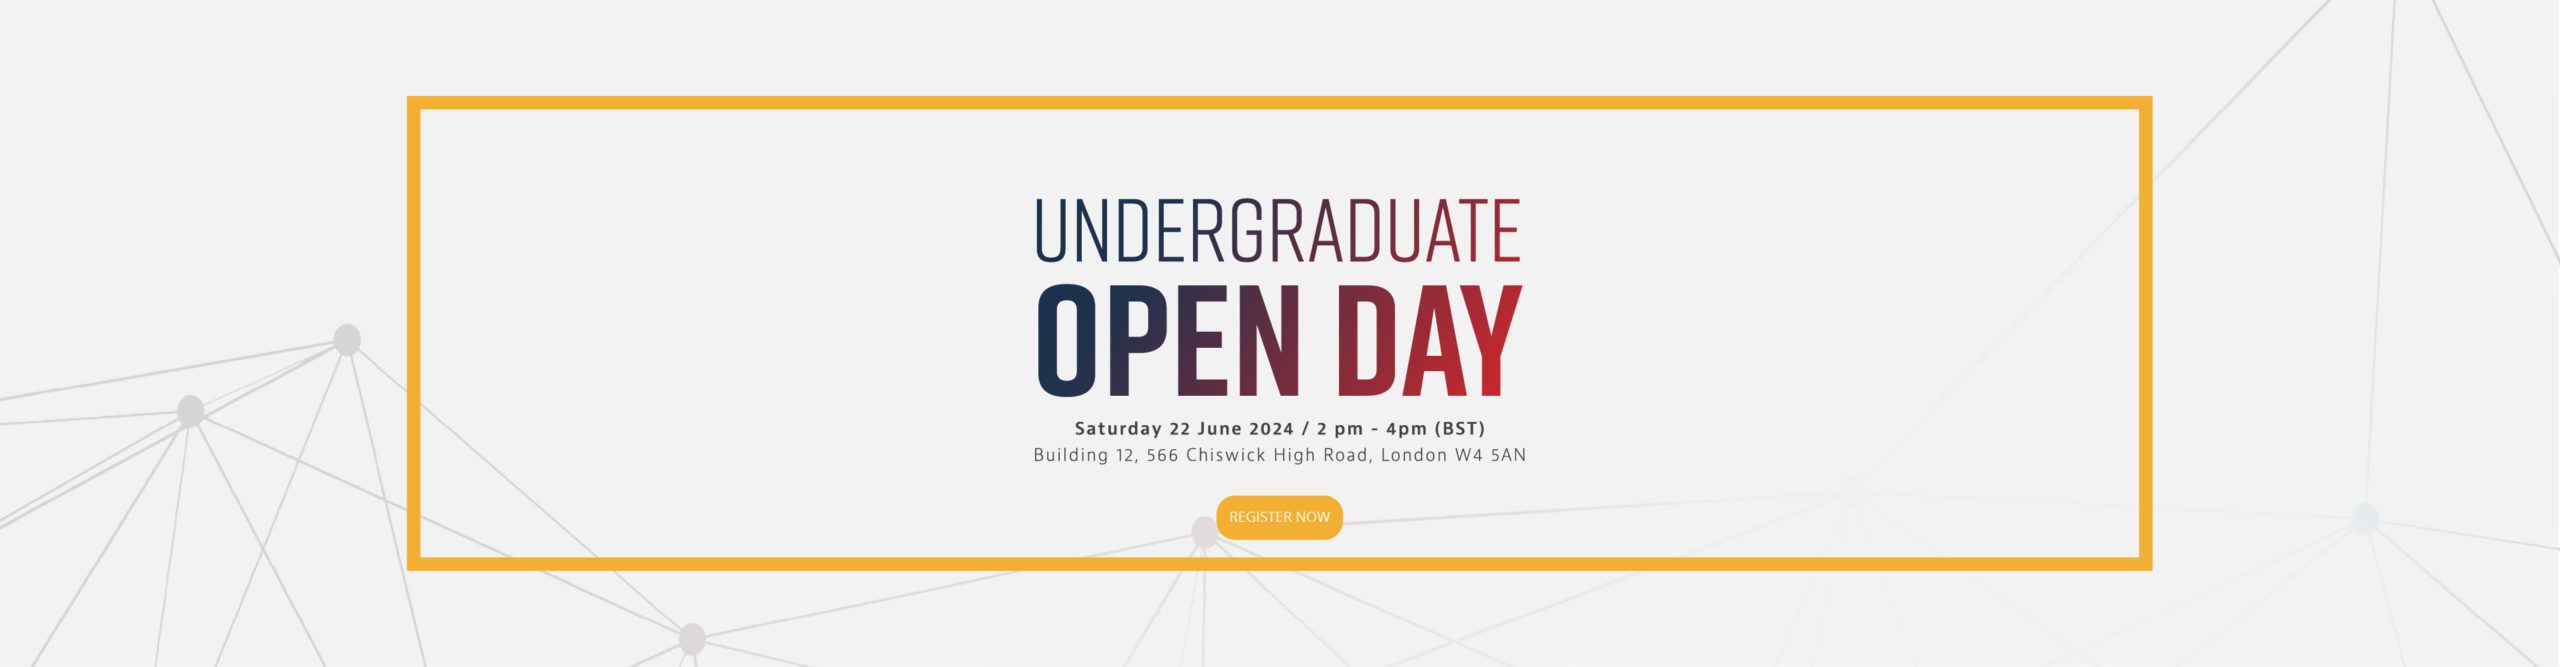 This image is an advertisement for an Undergraduate Open Day, scheduled for Saturday, 22 June, from 2 pm to 4 pm at an educational institution.